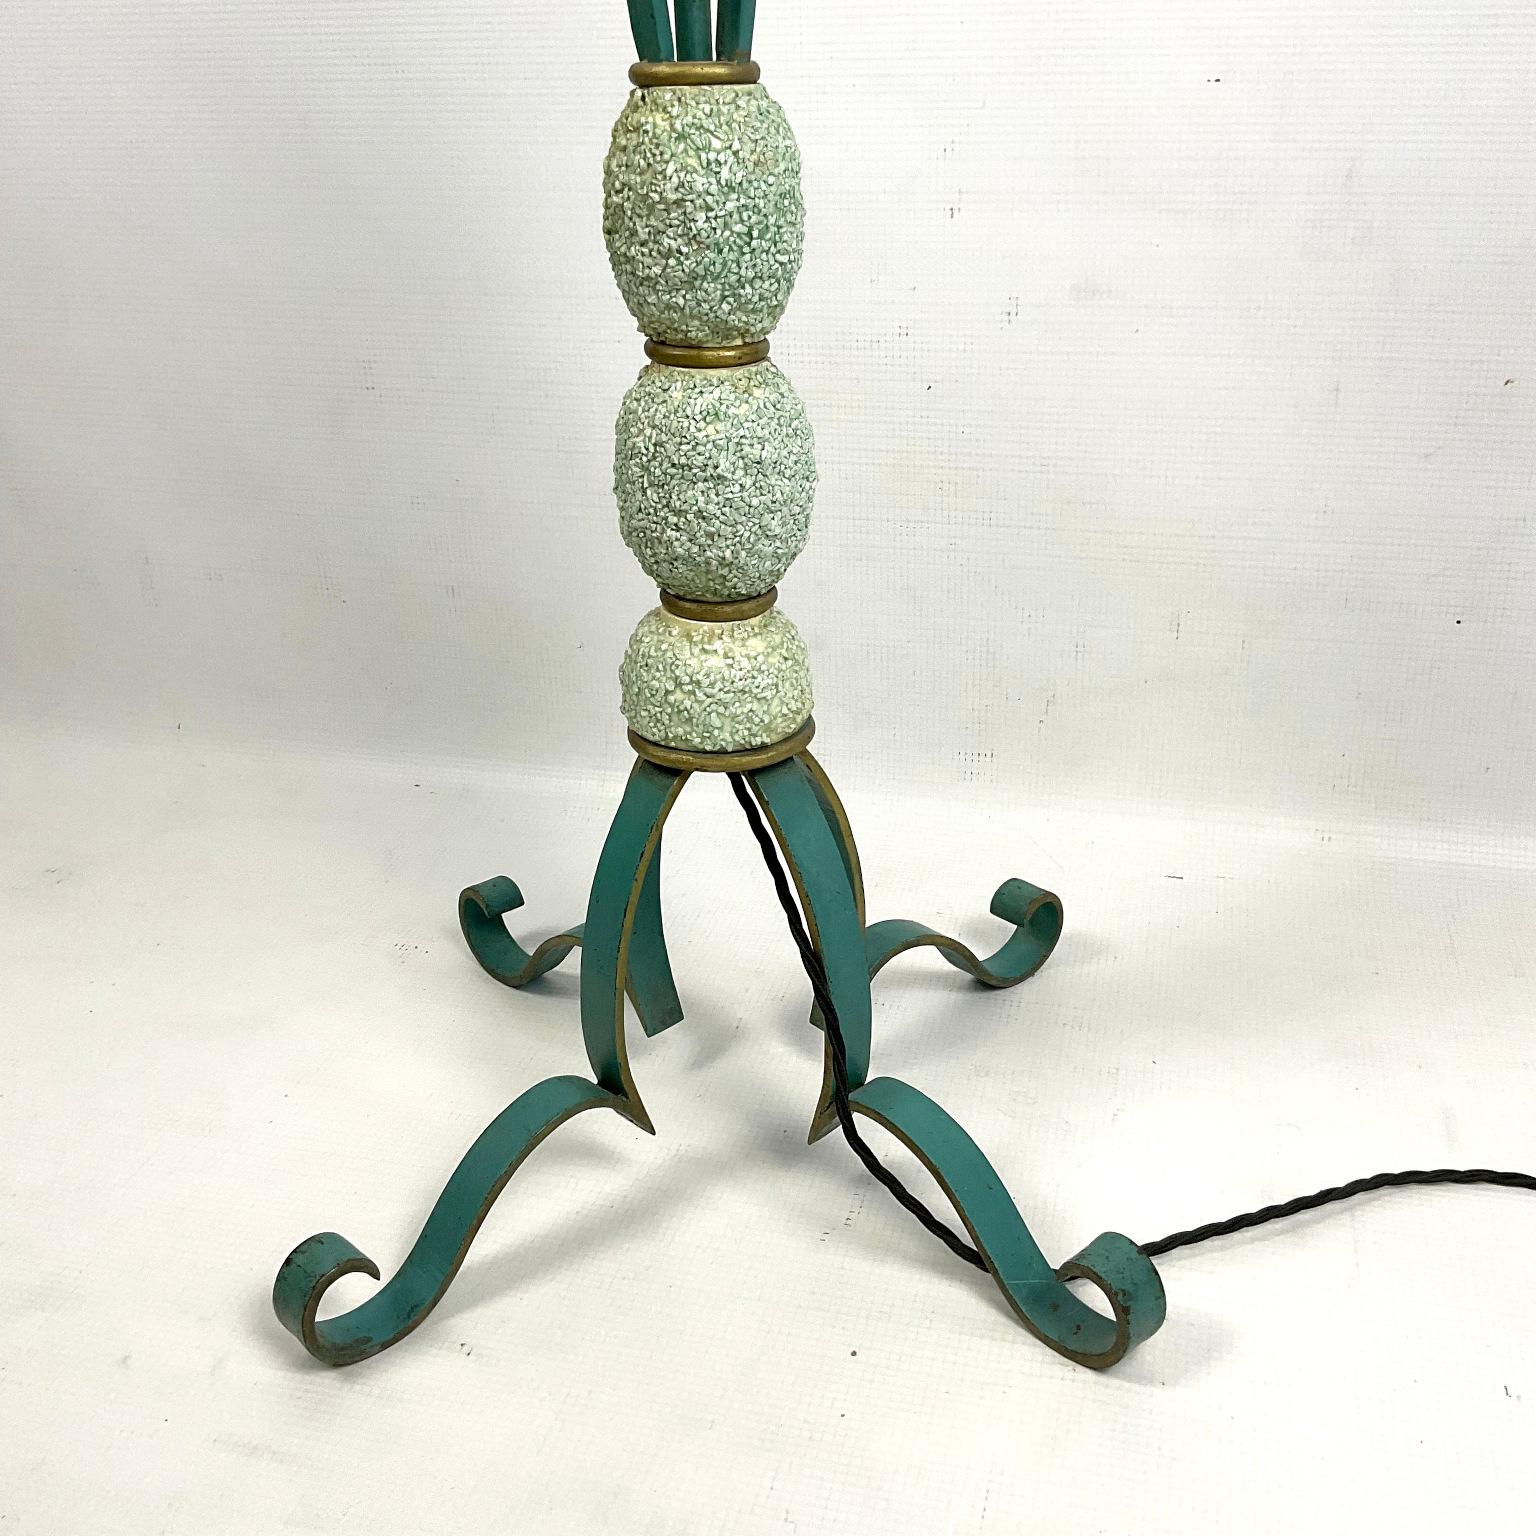 Ceramic 1940s French Wrought Iron Floor Lamp with Turquoise and Gold Enamel Finish 